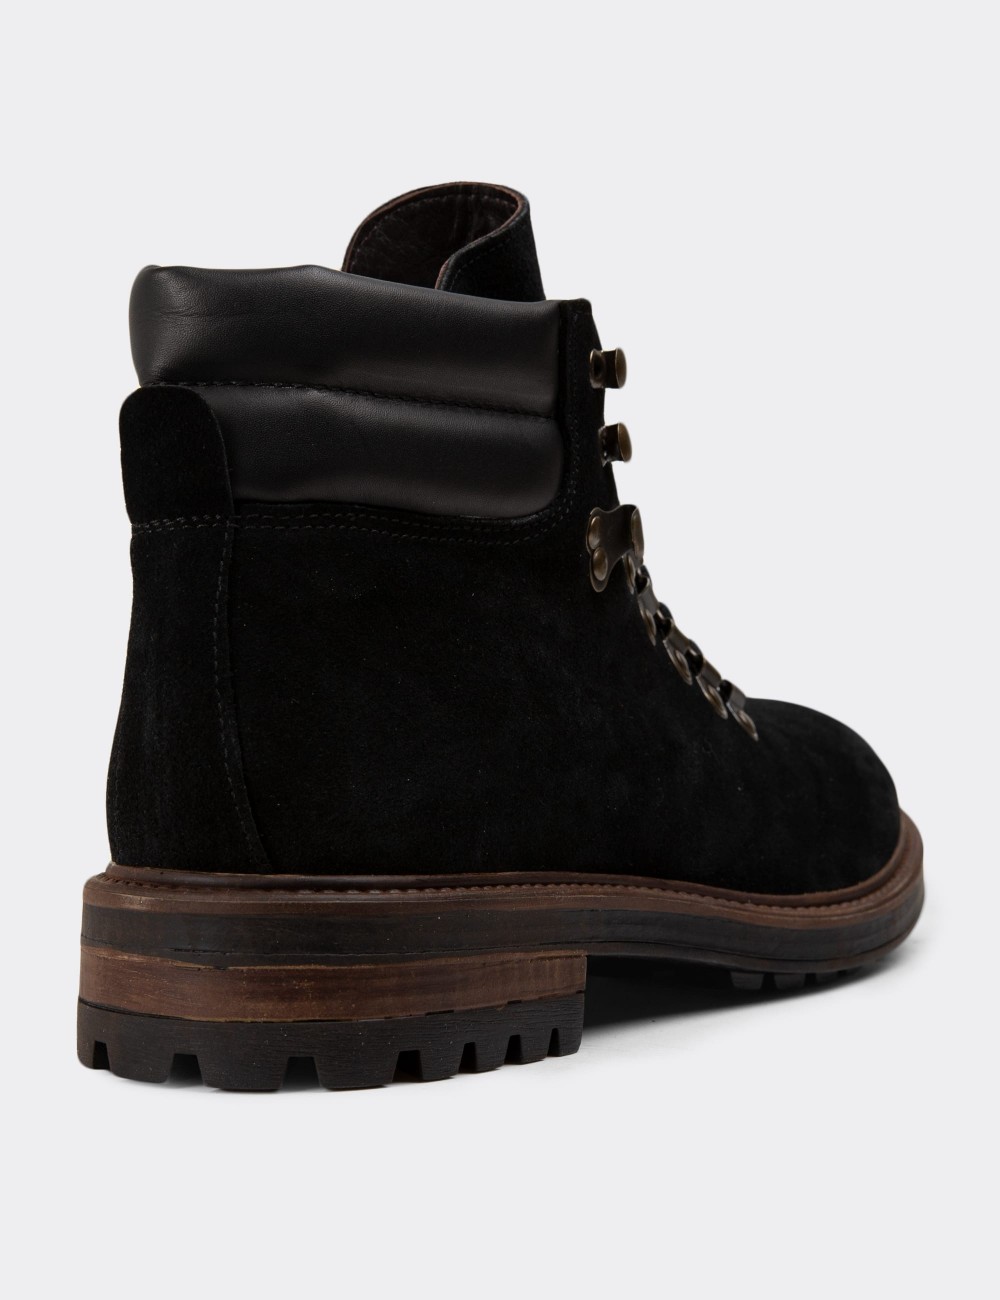 Black Suede Leather Boots - 01923MSYHC02